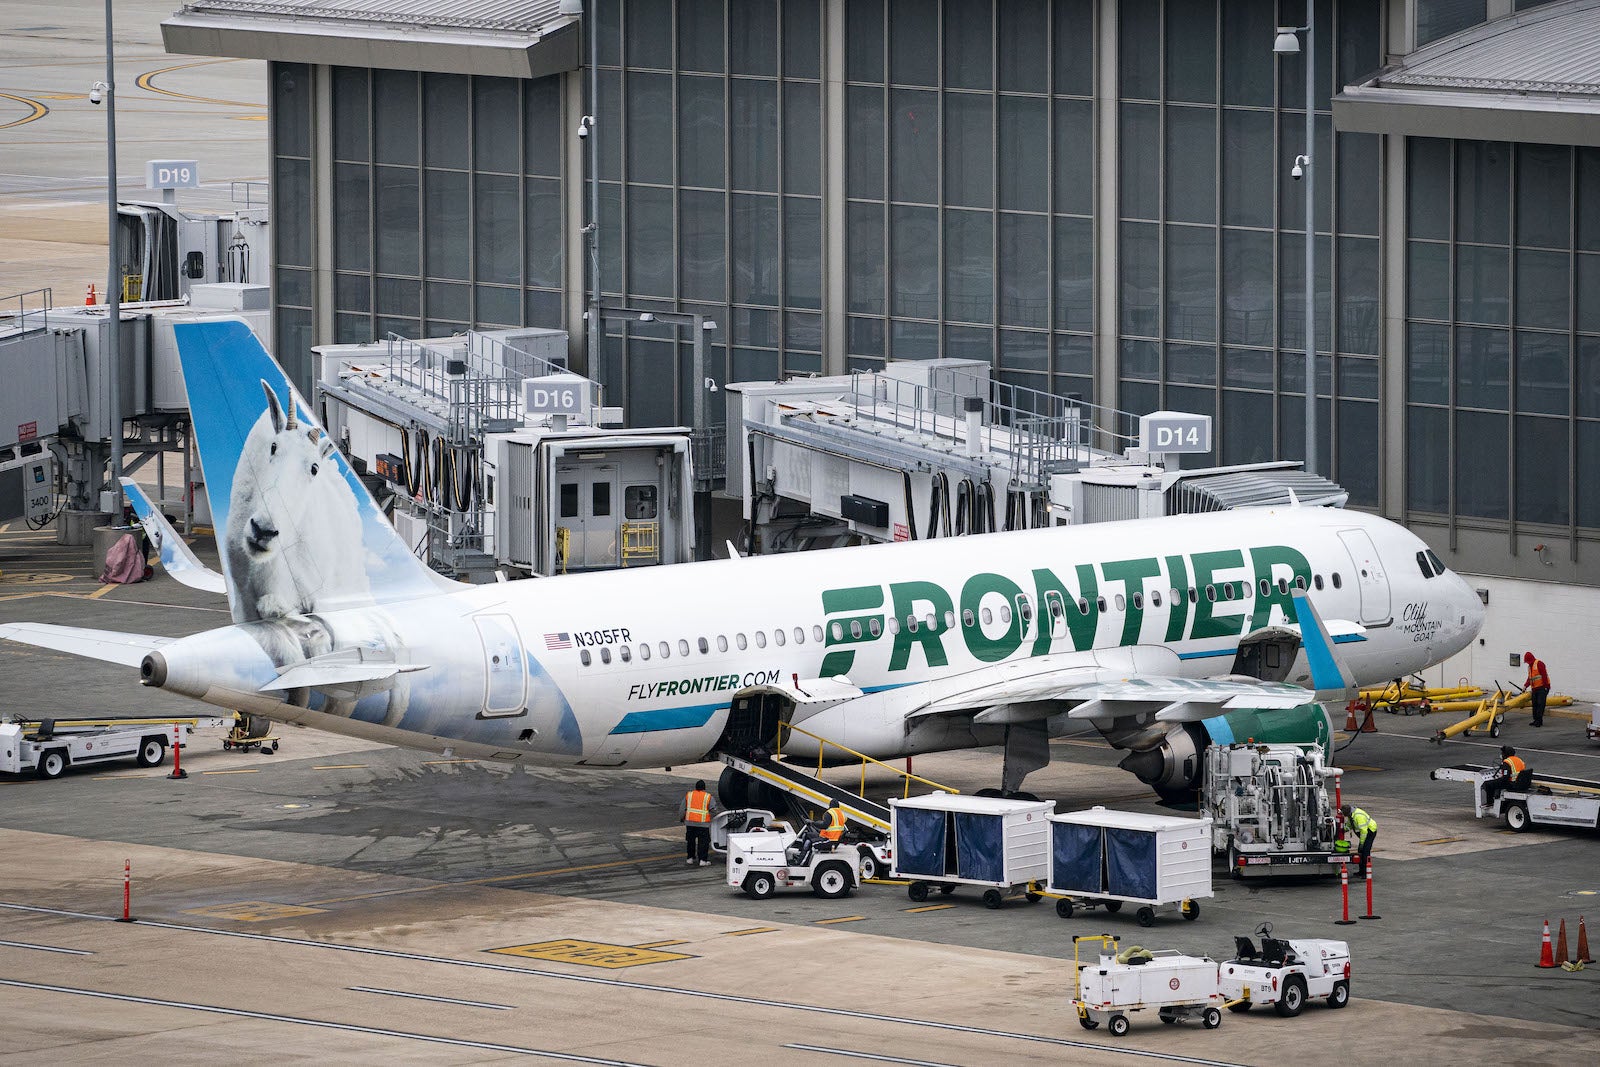 Frontier Airlines plane at the gate in RDU airport